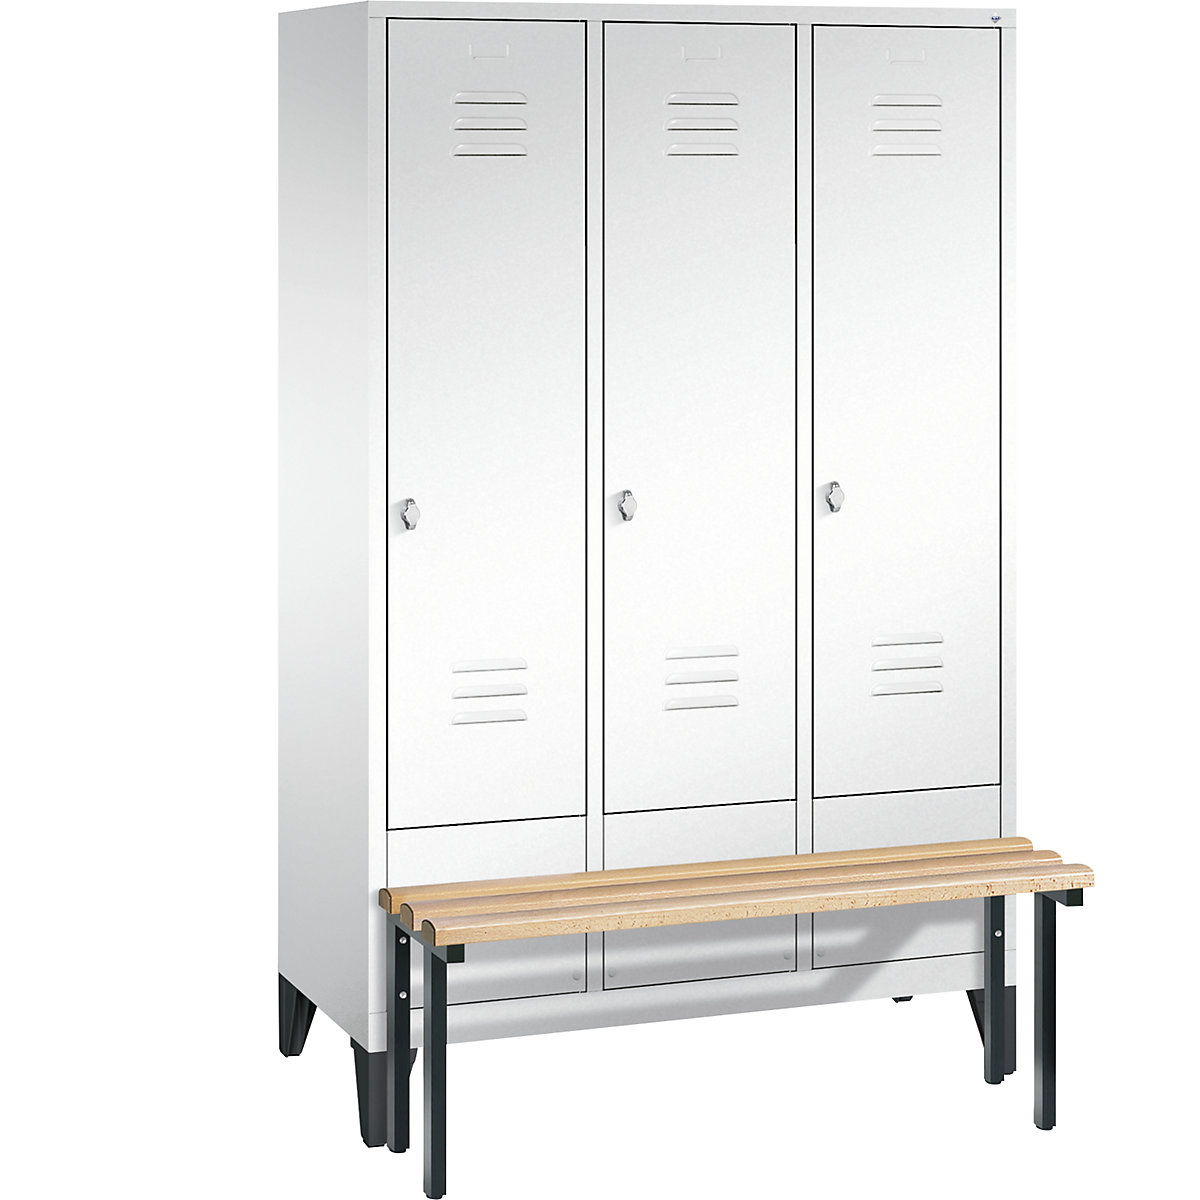 CLASSIC cloakroom locker with bench mounted in front - C+P